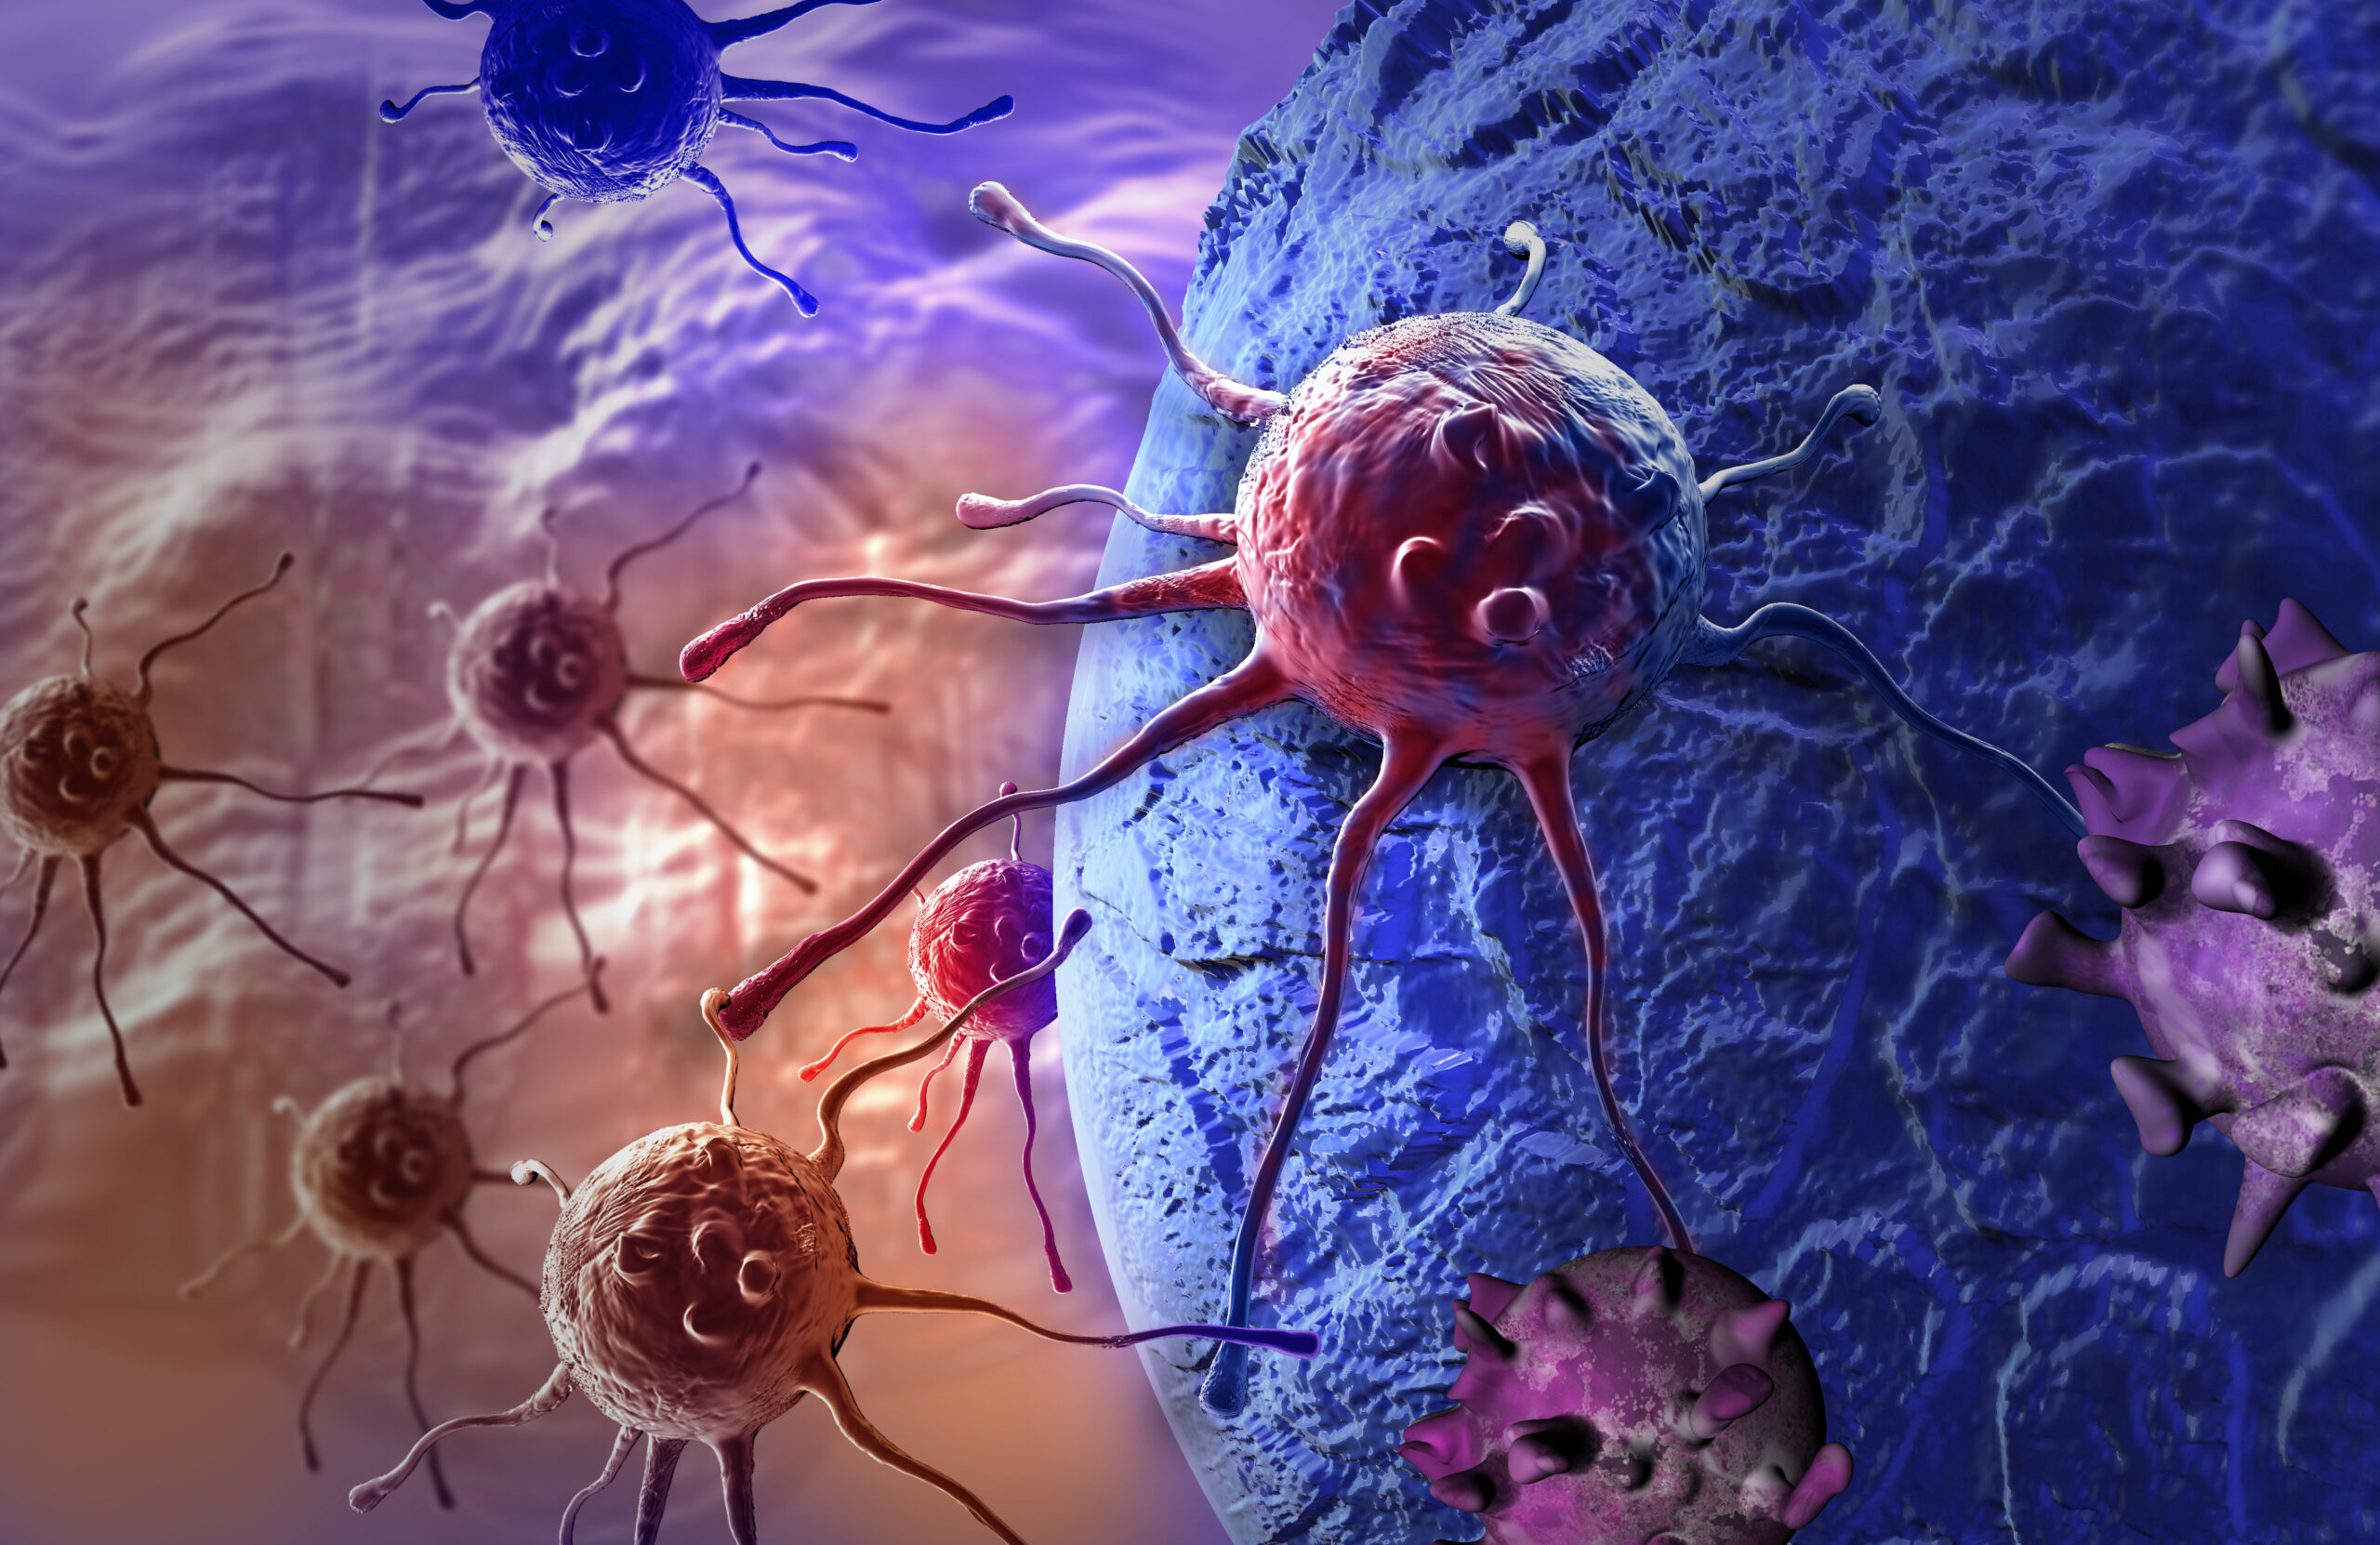 Liquid Biopsy NGS Companion Diagnostic Test For Cancers & Biomarkers Approved